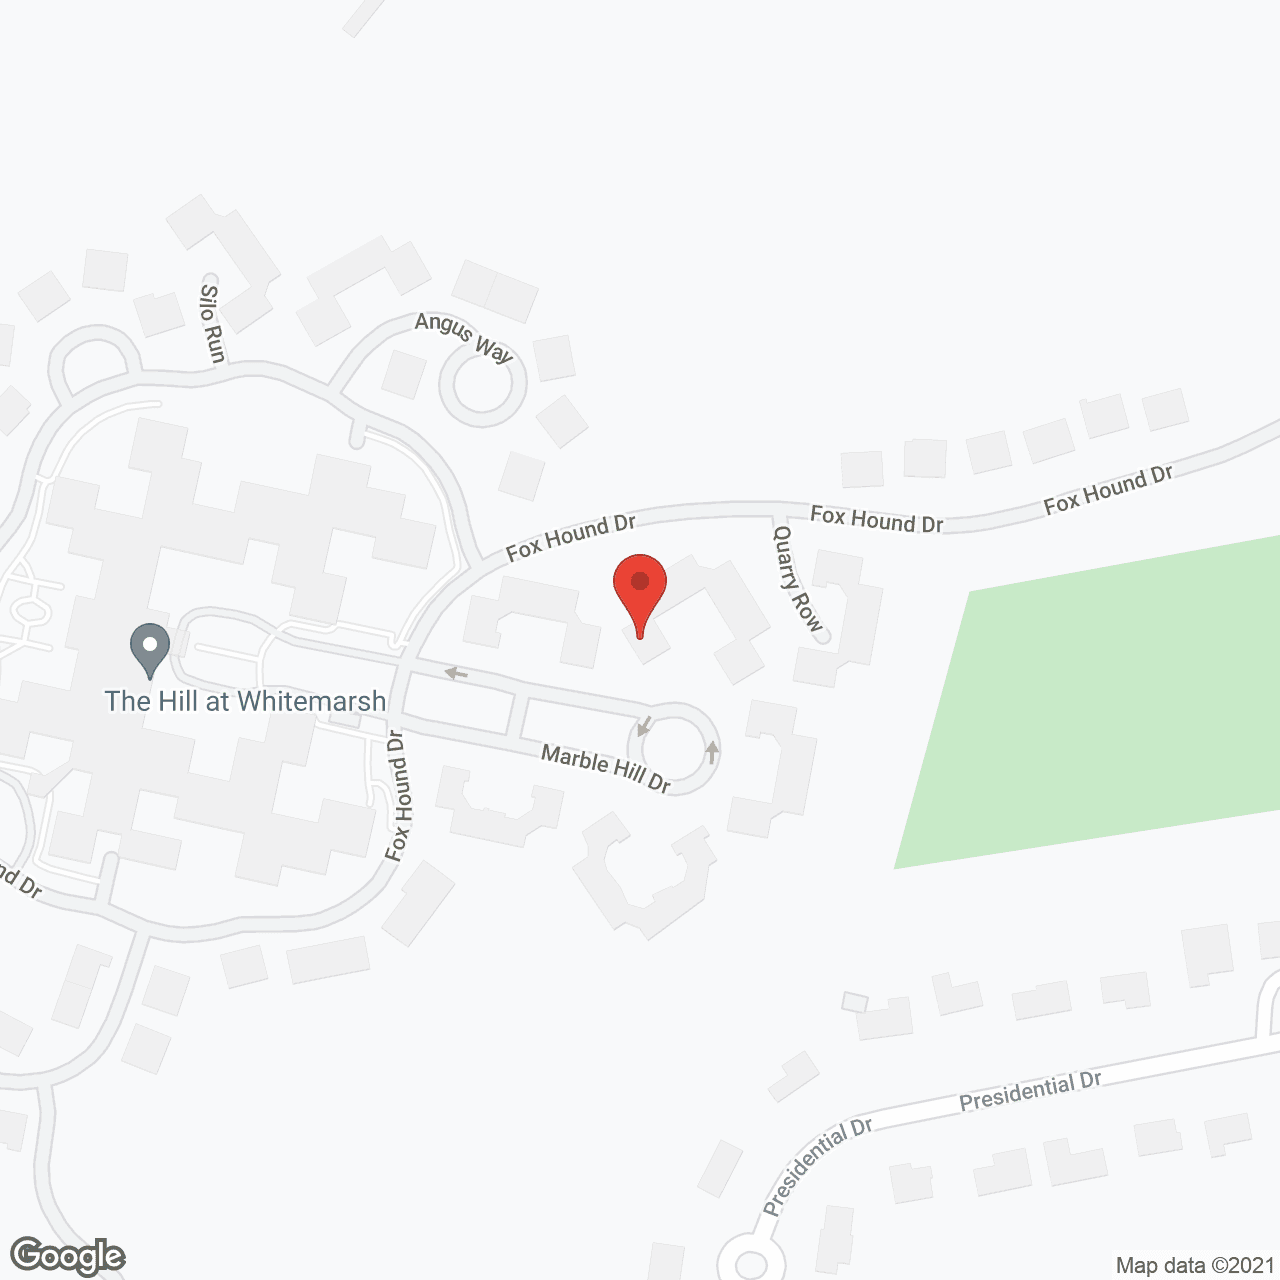 The Hill at Whitemarsh in google map